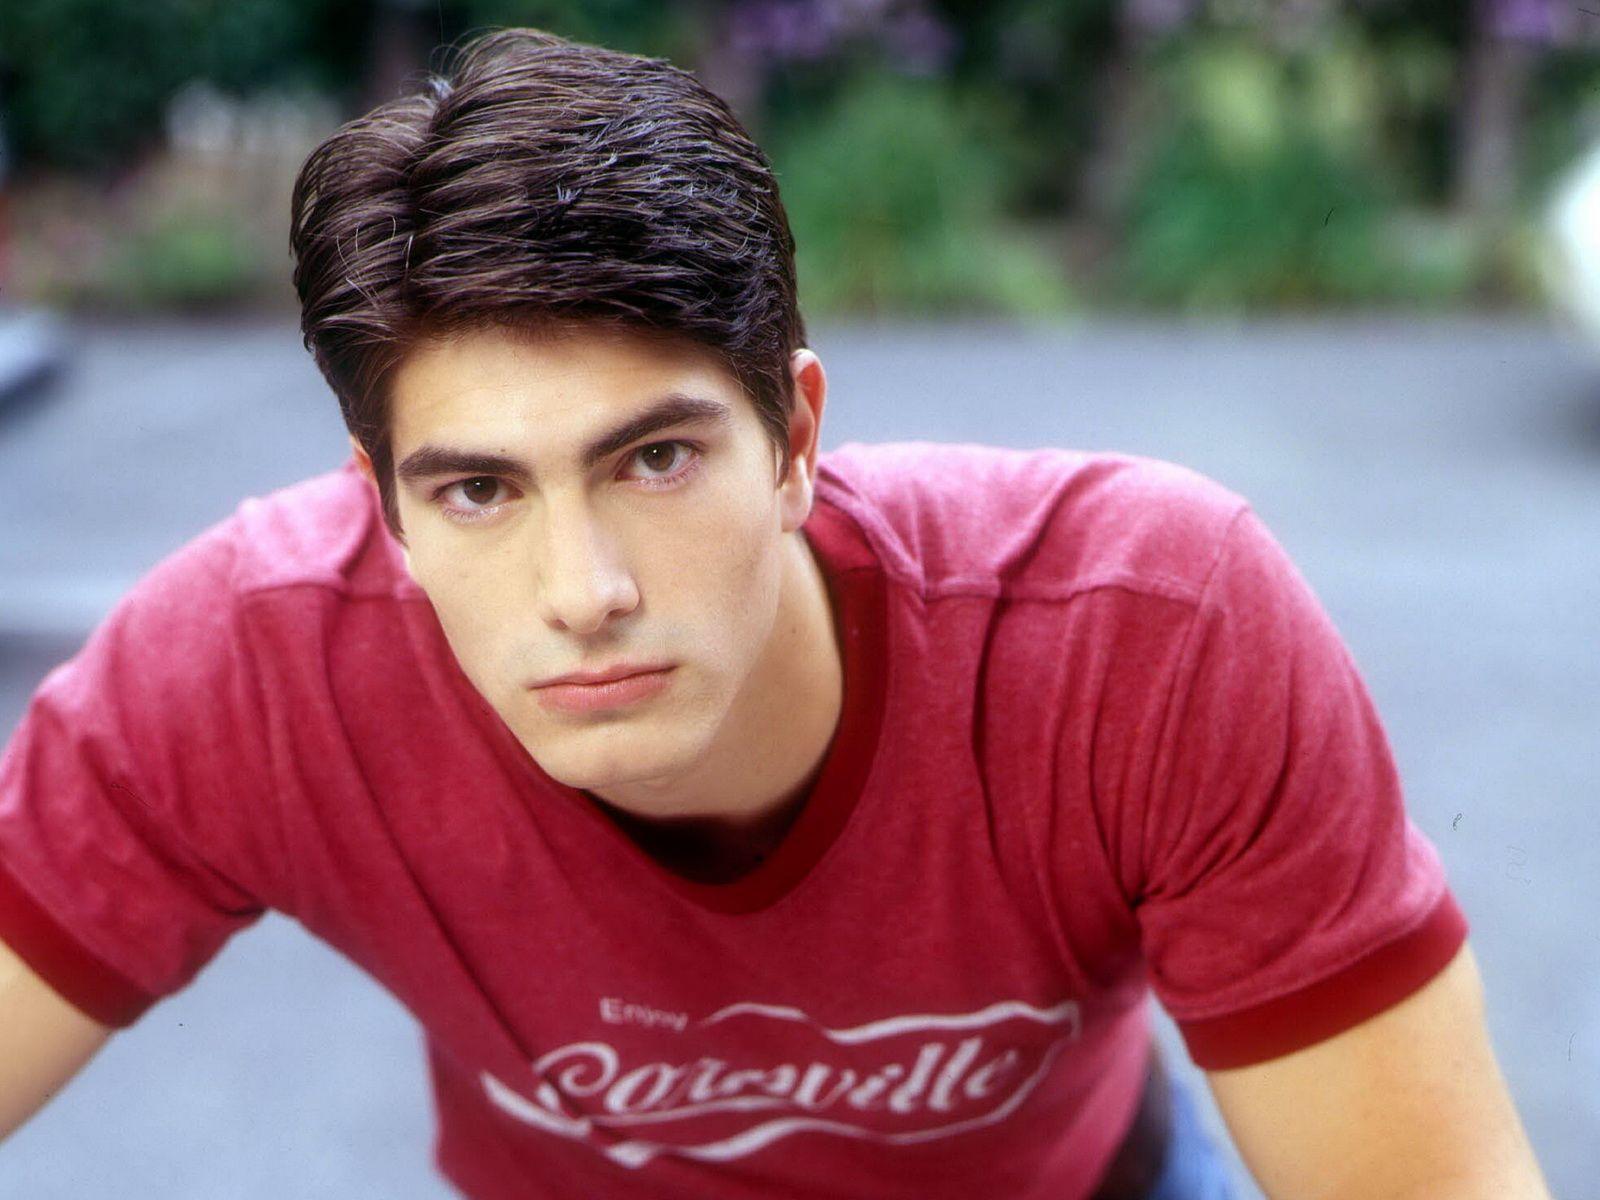 Brandon Routh HD Wallpaper of High Quality Download